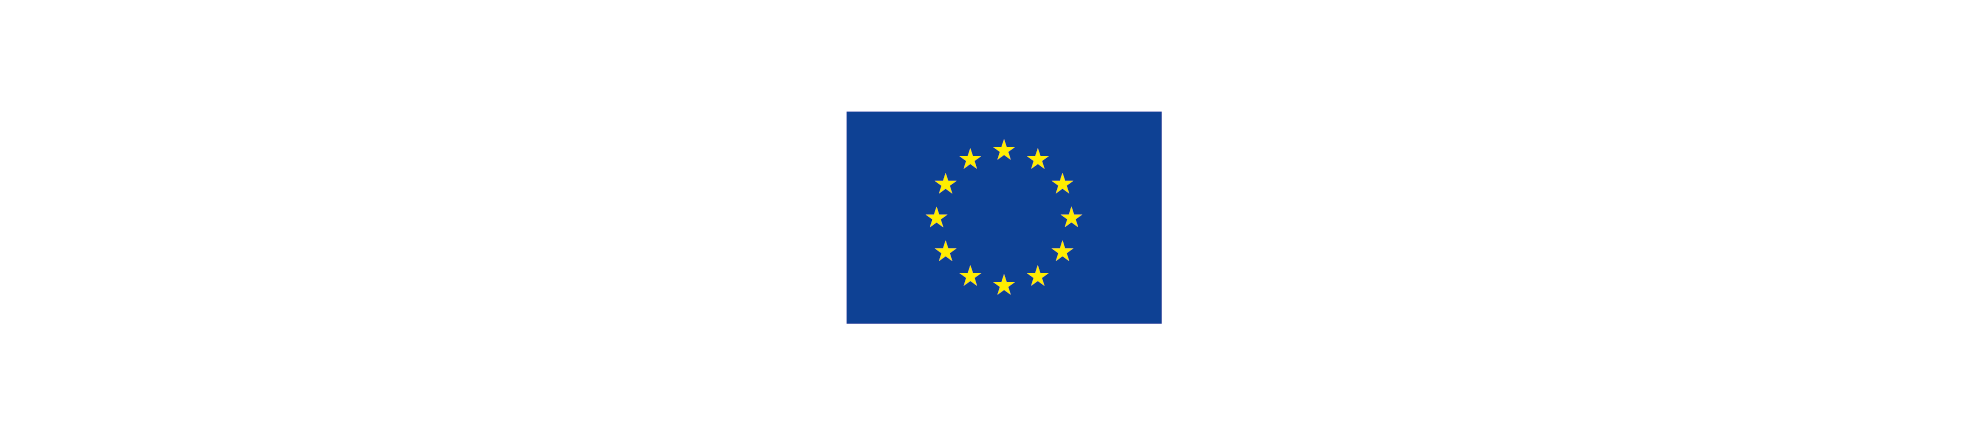 Interreg Österreich-Bayern, Co-funded by the European Union